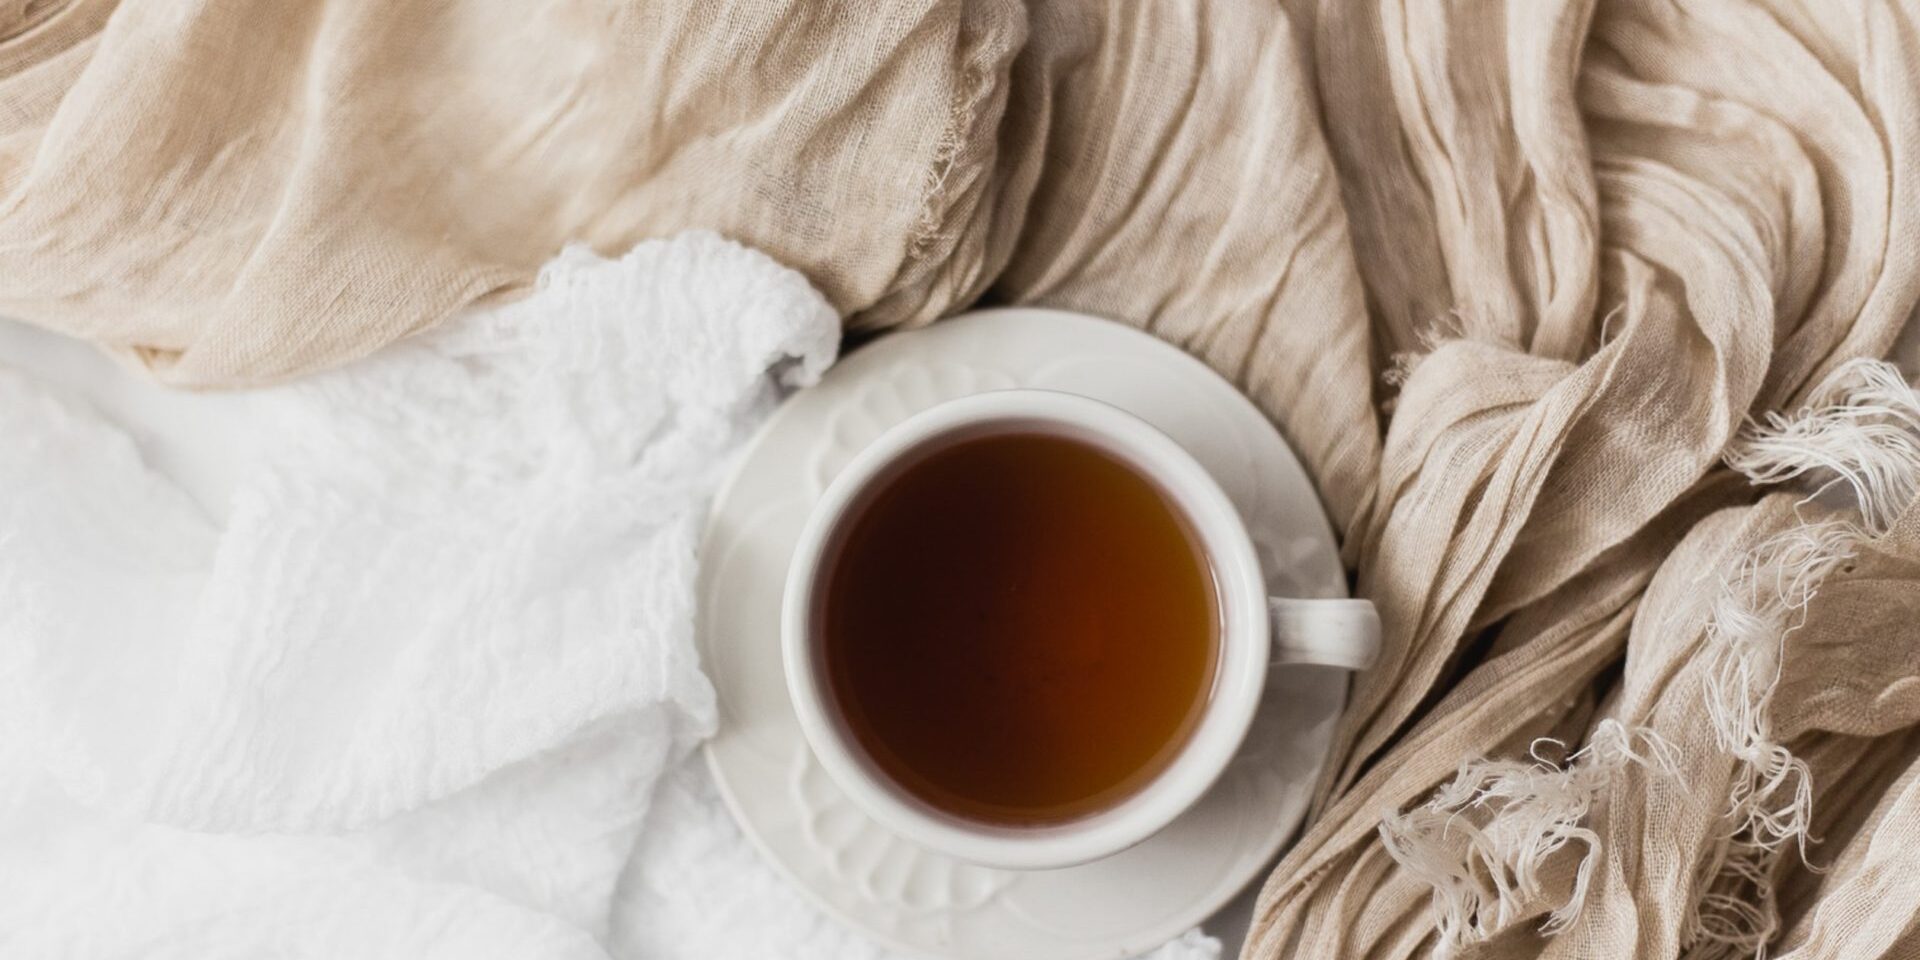 A cup of black tea resting on white and cream blankets – our case study for Twinings careers